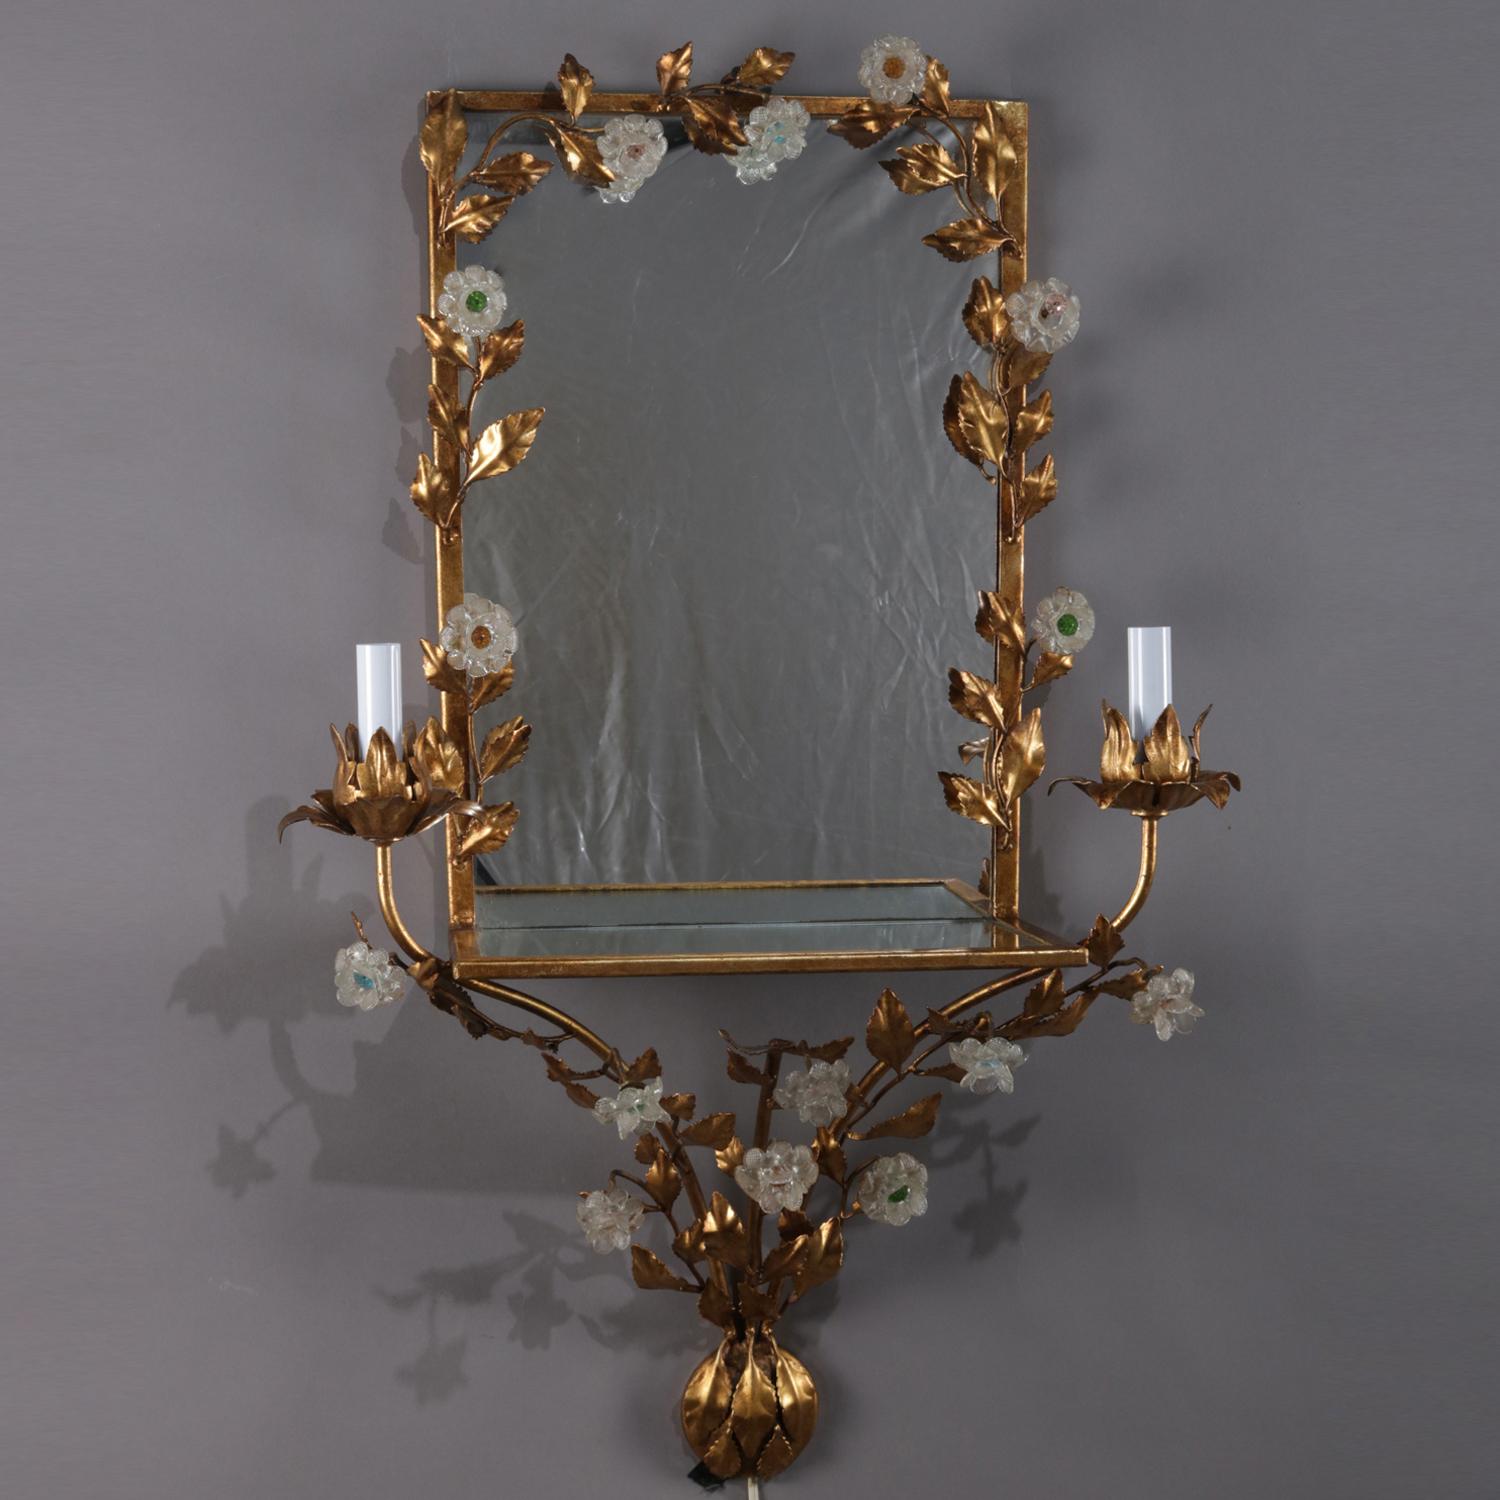 Vintage Italian candle light sconce features mirror with gilt metal frame decorated in foliate leaf and vine having attached crystal flowers and terminating at base with gathered bouquet, mirrored display shelf is flanked by electric candle lights